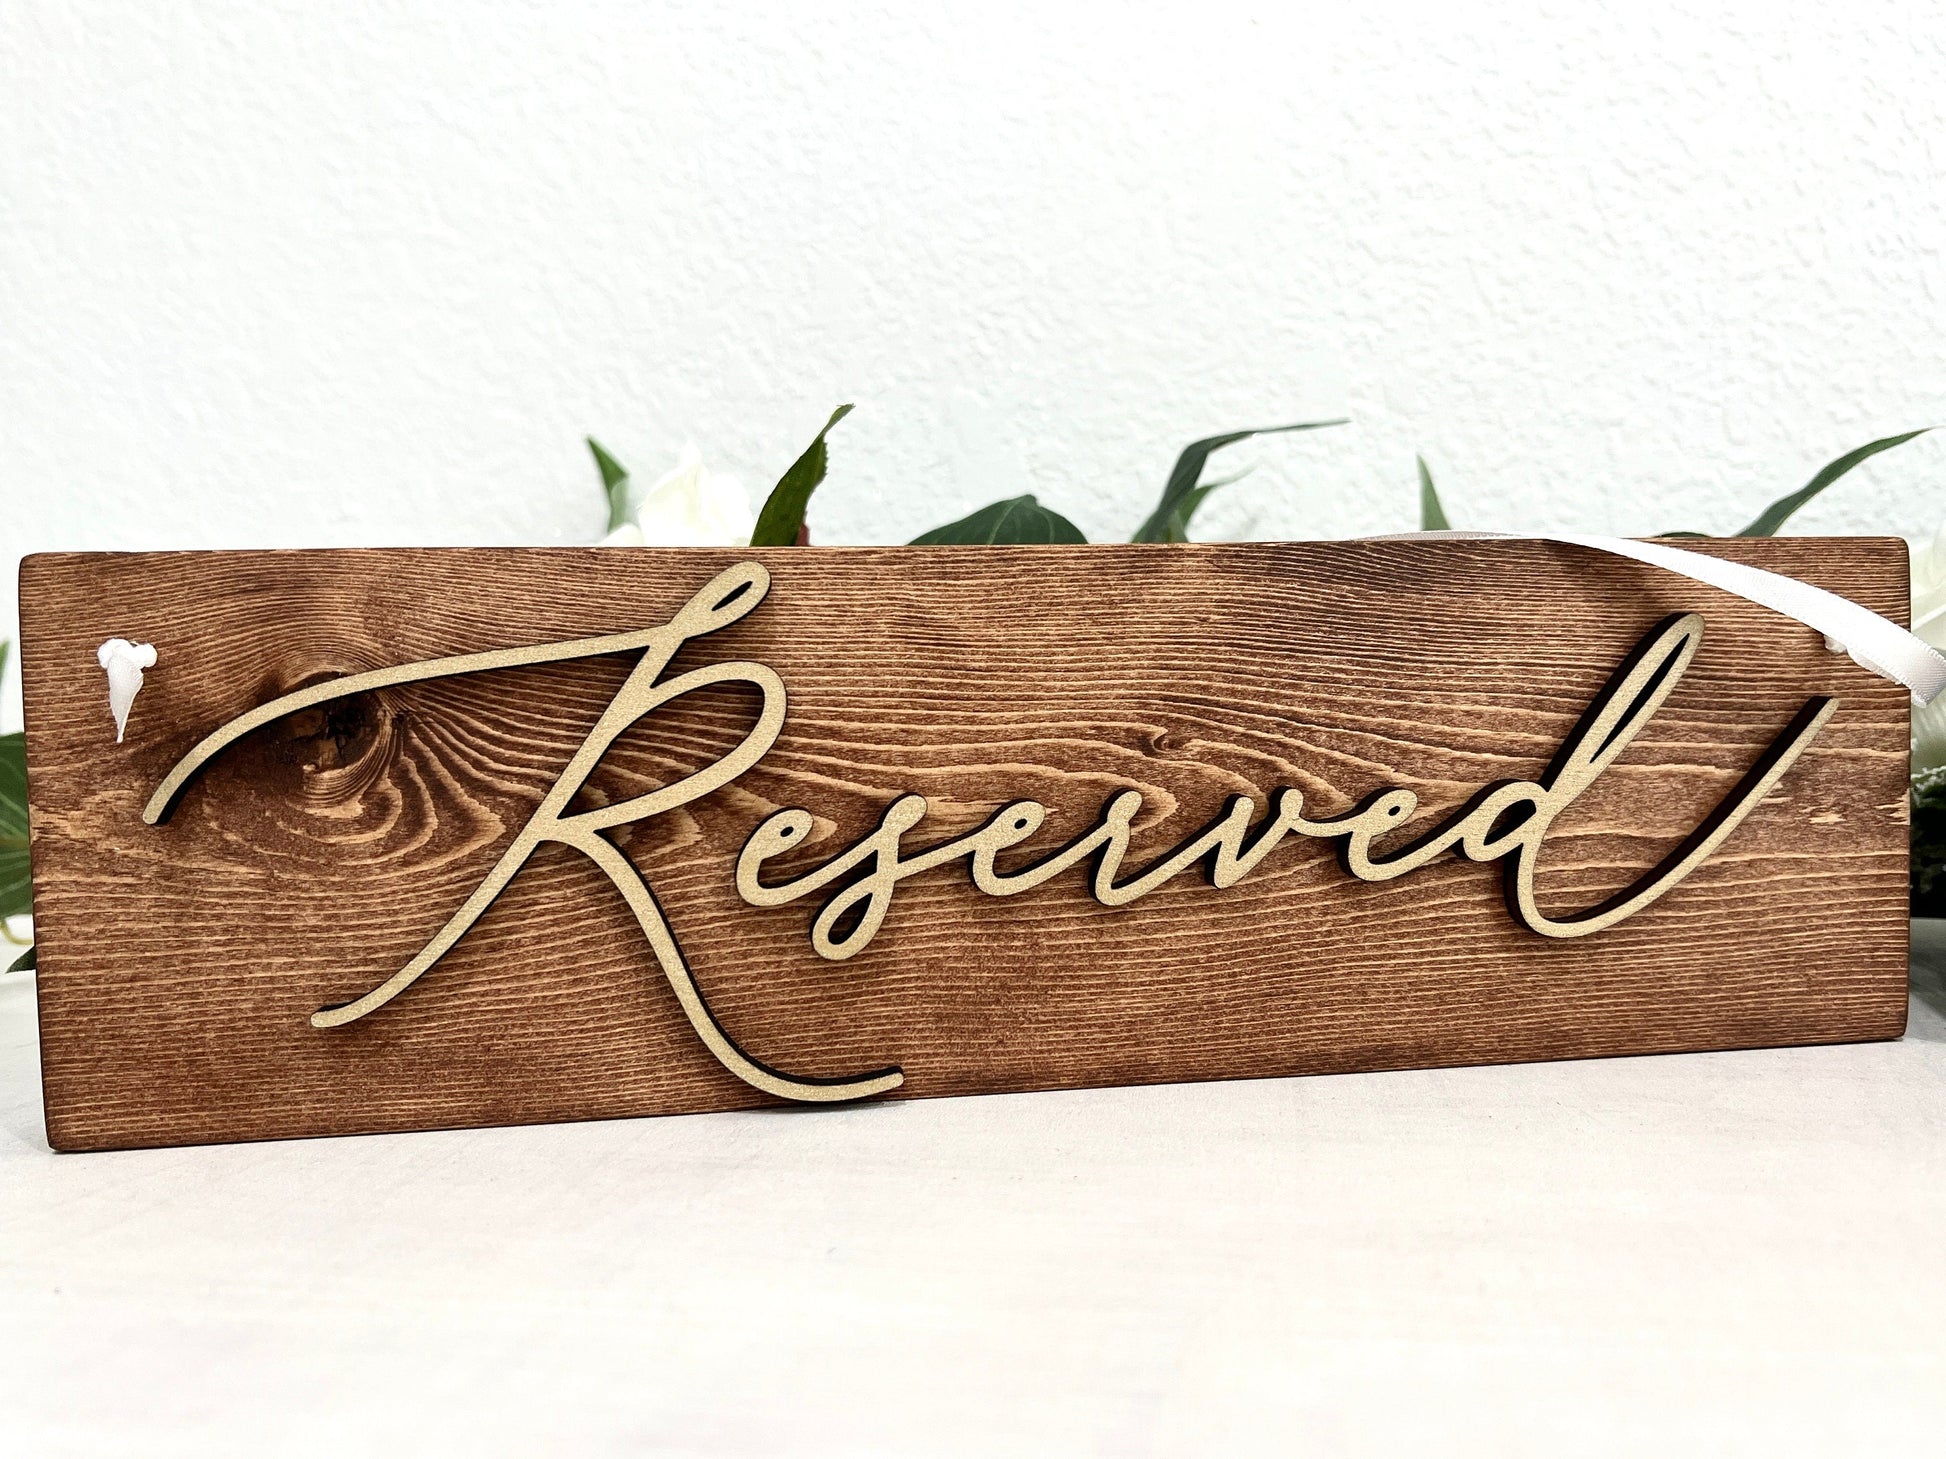 table reserved sign - Woodbott